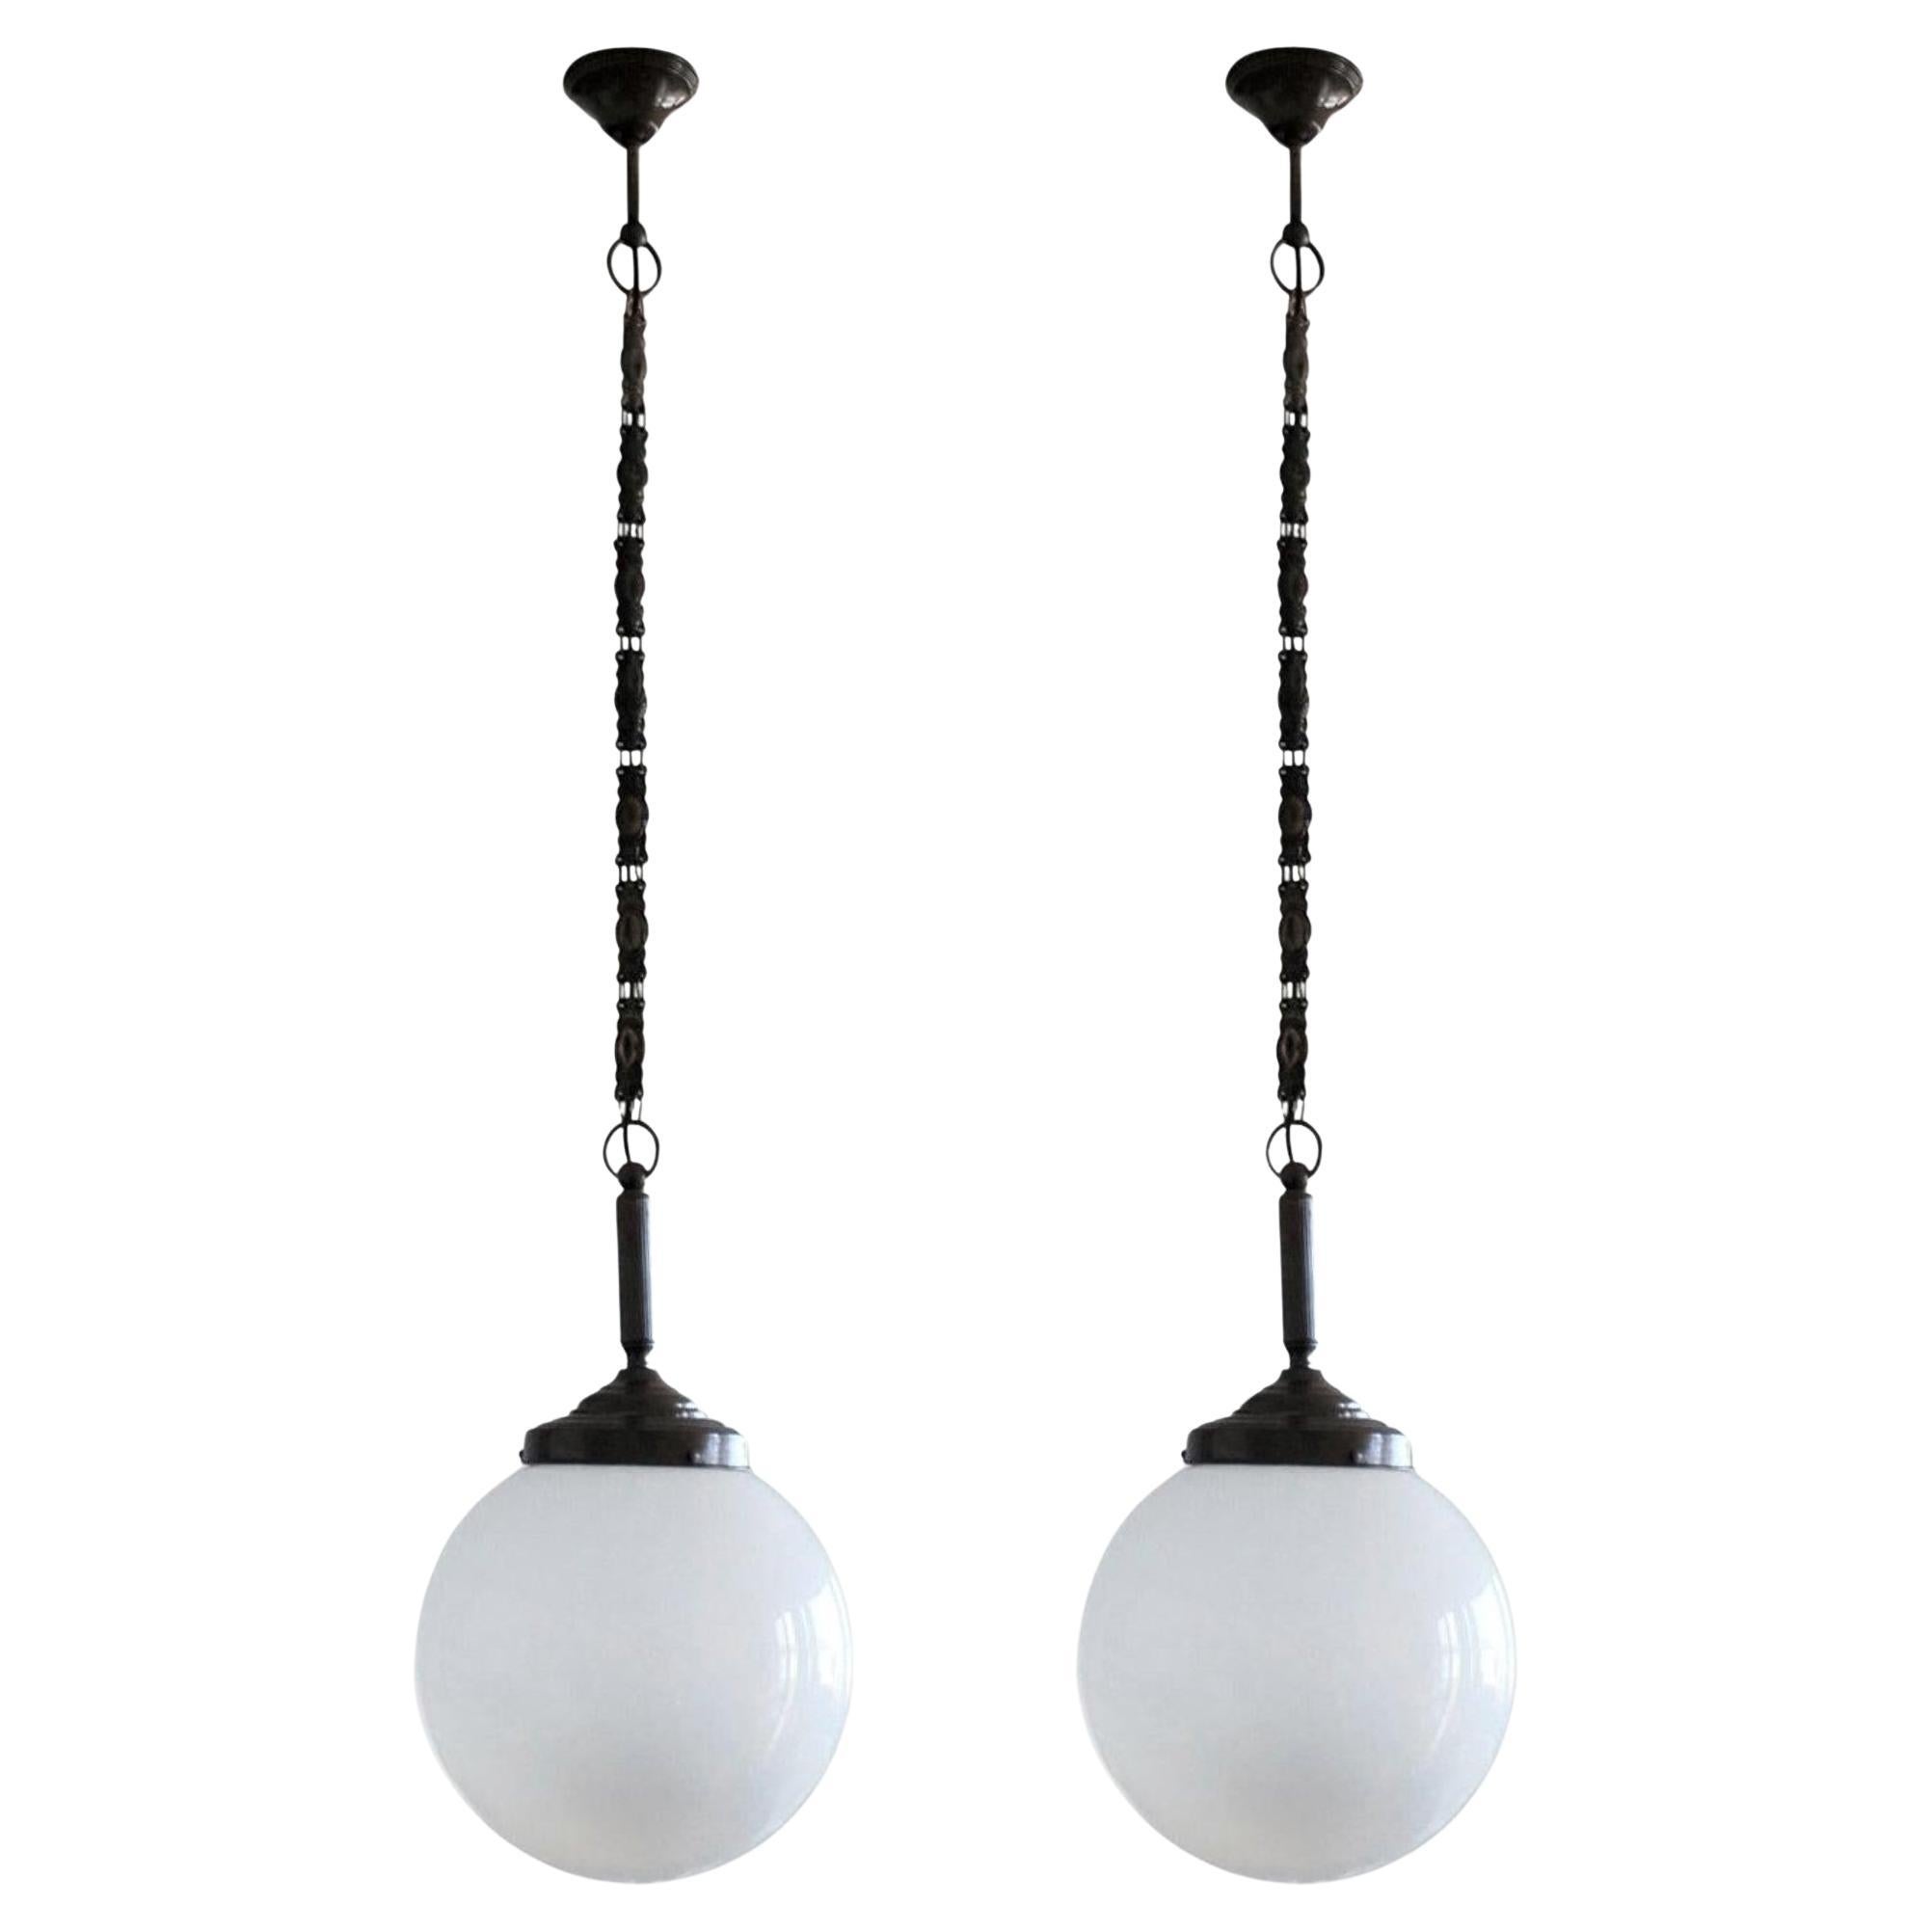 Pair of hand blown Opaline glass ball pendants with burnished brass mounts, chain and canopy, Italy, 1930-1939.
One porcelain E27 light socket for a large sized bulb up to 100W.
Measures: Diameter 12